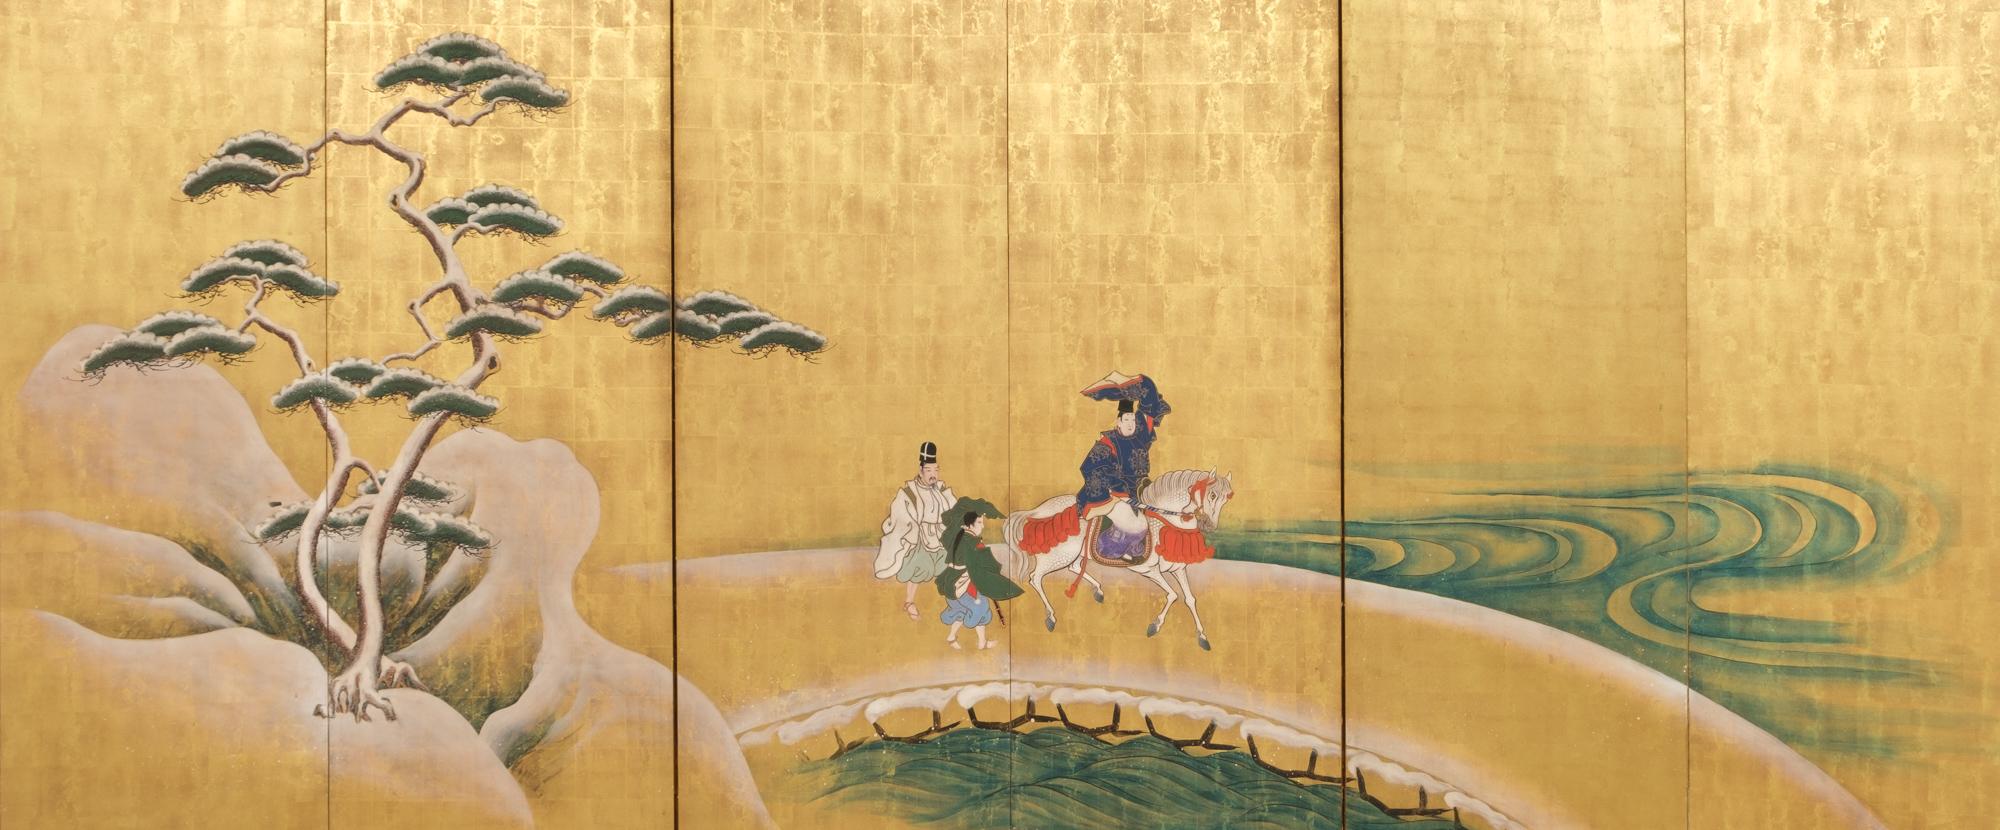 An exquisite large six-panel byôbu (folding screen) with a refined 'Tosa School'-style painting on gold leaf of a scene from chapter 13: ‘The Lady at Akashi’ (Akashi) from ‘The Tale of Genji’ (Genji Monogatari).

Prince Genji is riding a bright